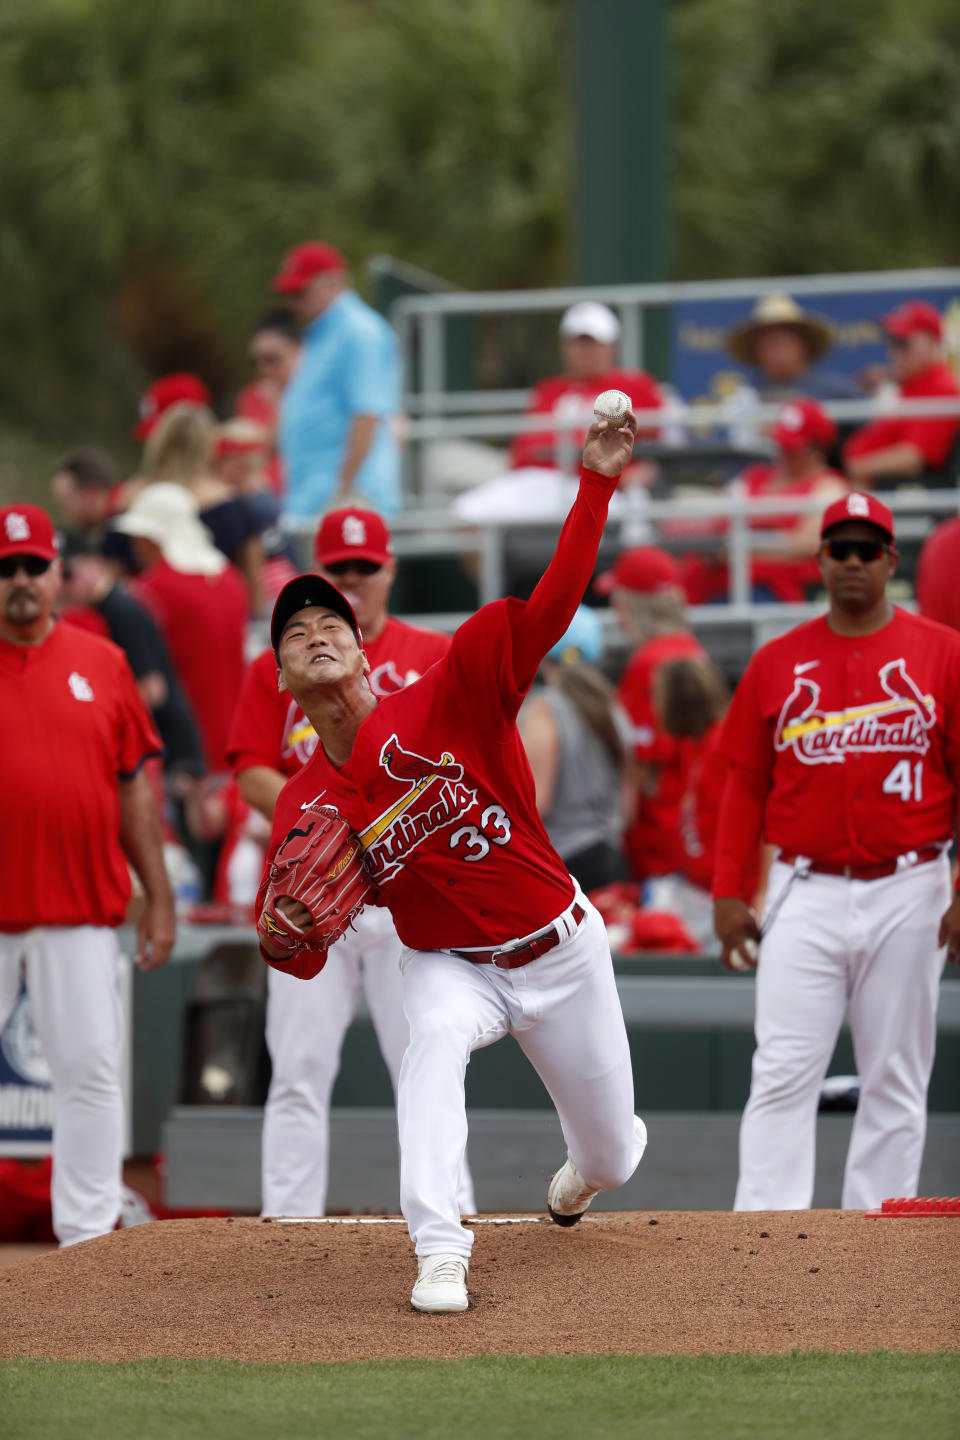 St. Louis Cardinals pitcher Kwang-Hyun Kim warms up before the start of a spring training baseball game against the Miami Marlins Wednesday, Feb. 26, 2020, in Jupiter, Fla. (AP Photo/Jeff Roberson)